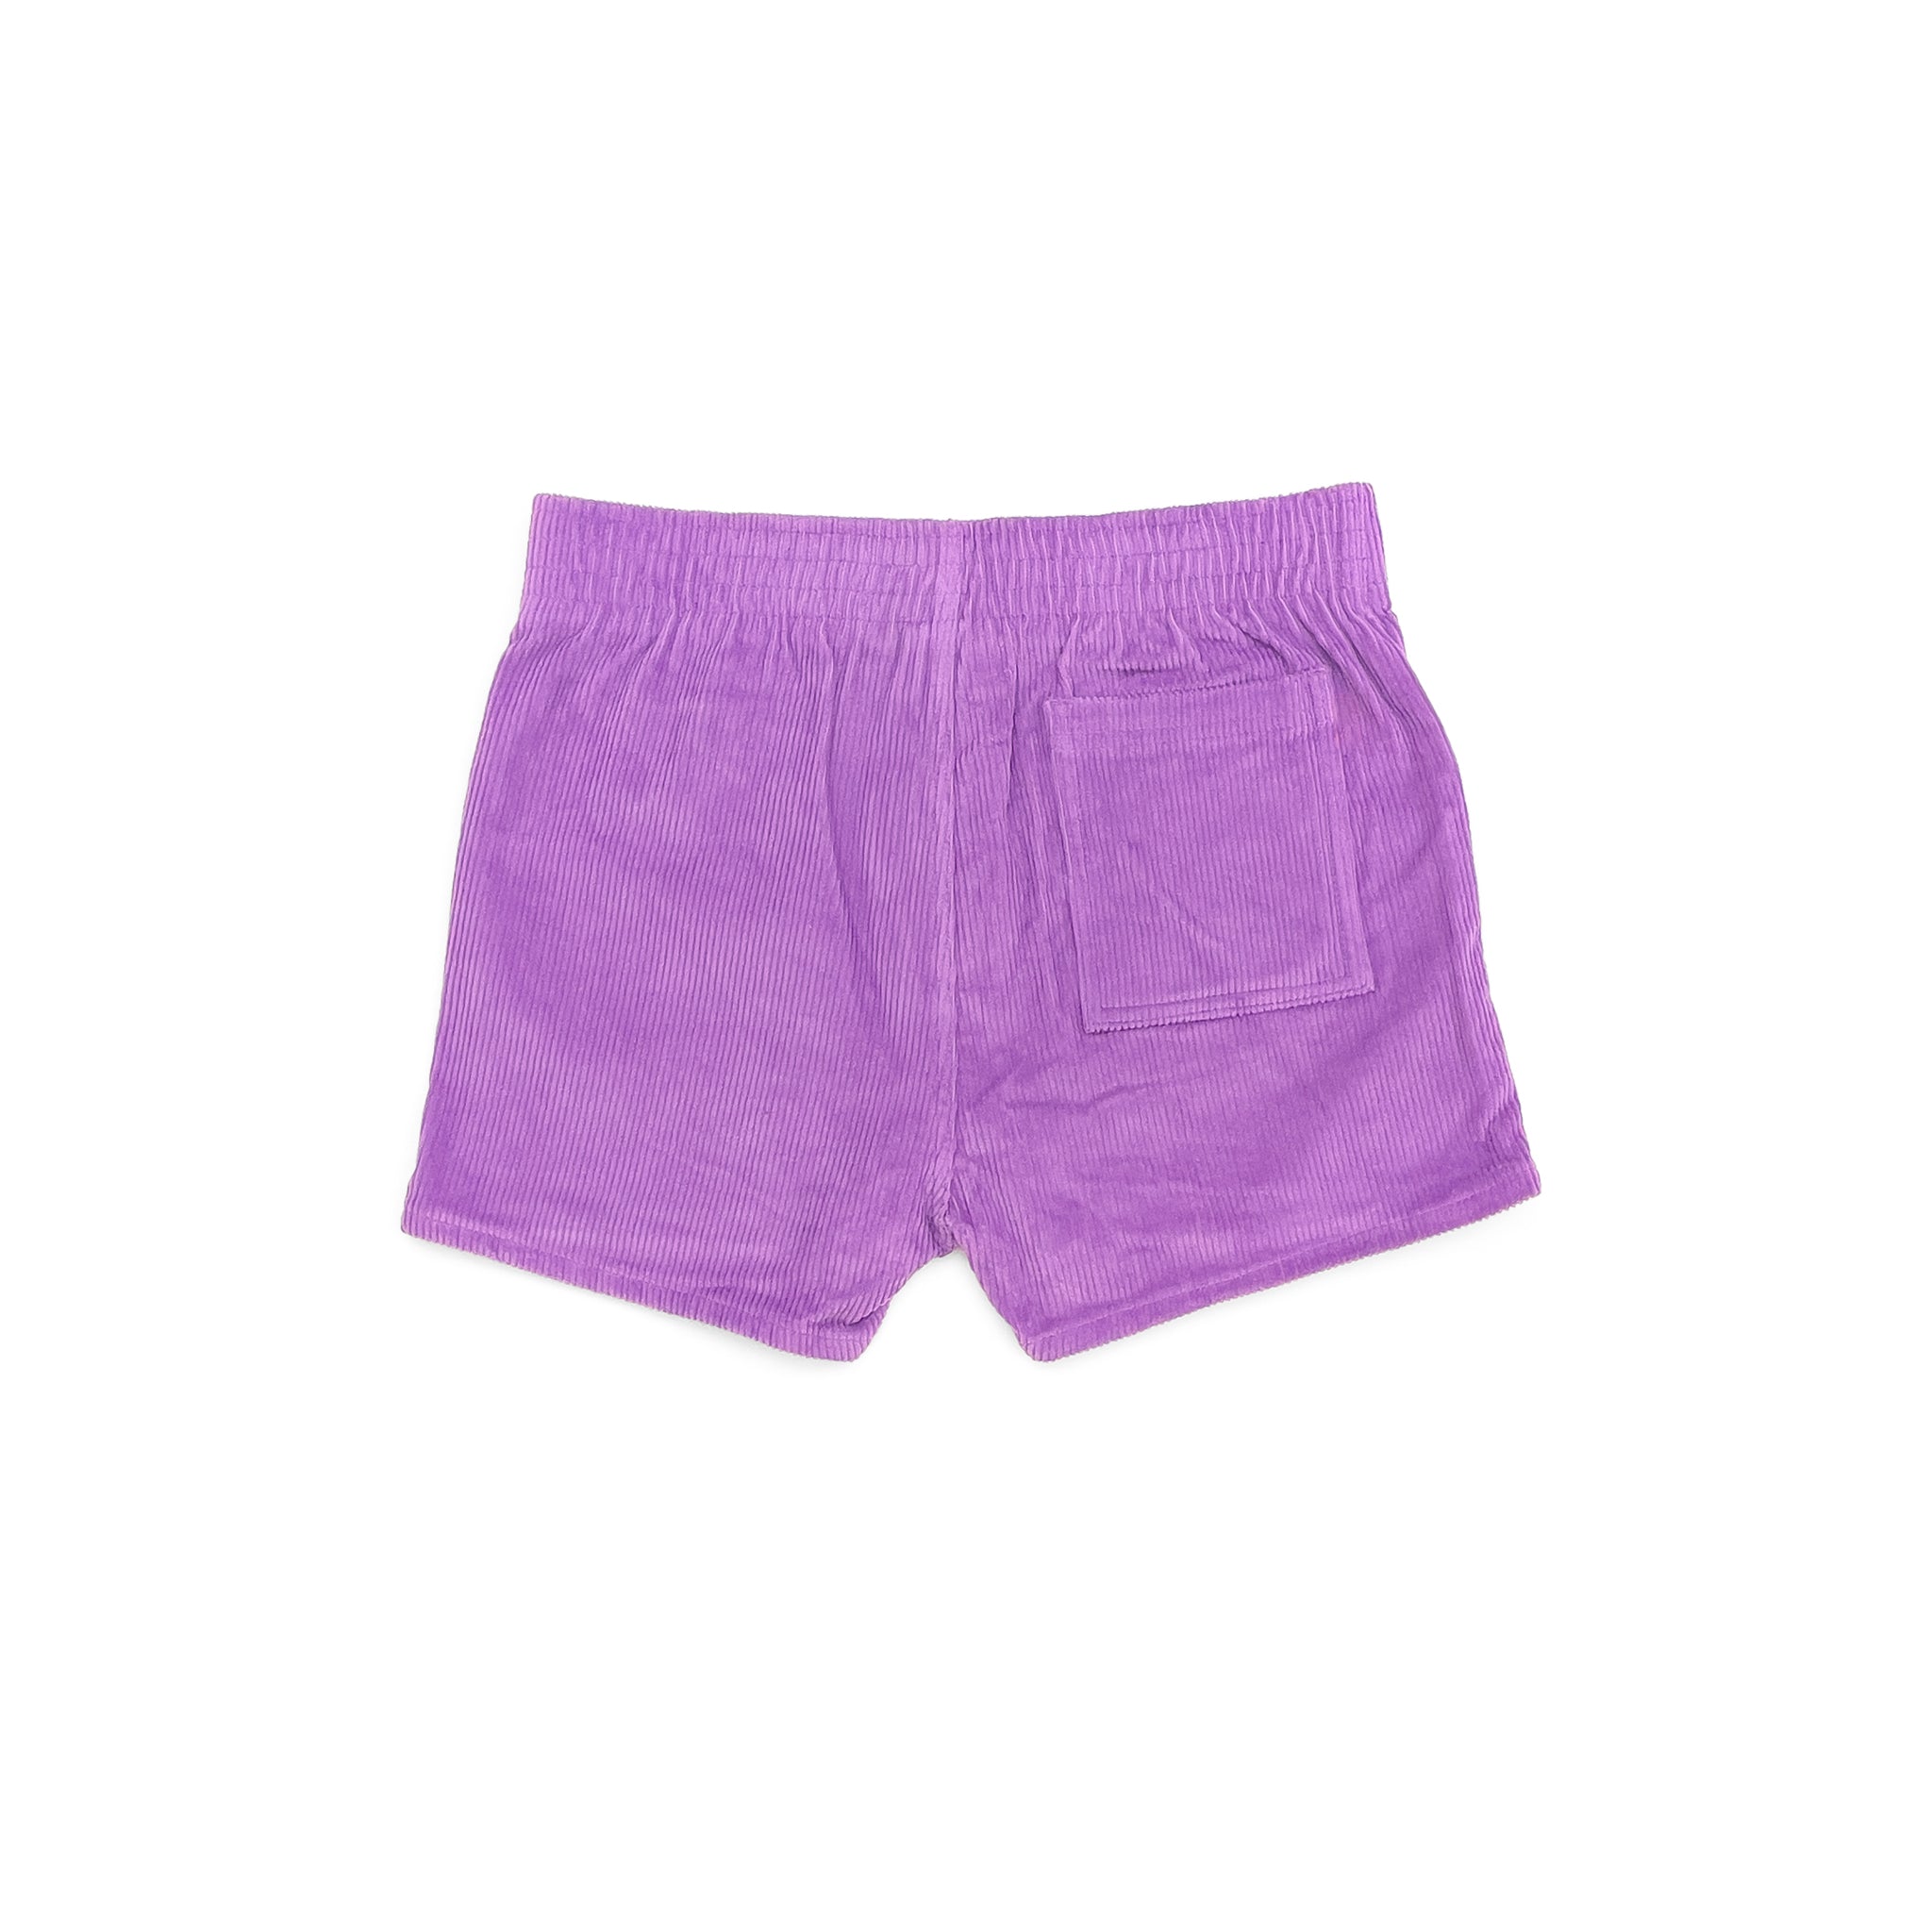 Pastel Pink Cotton Boxer Shorts, Men's Country Clothing